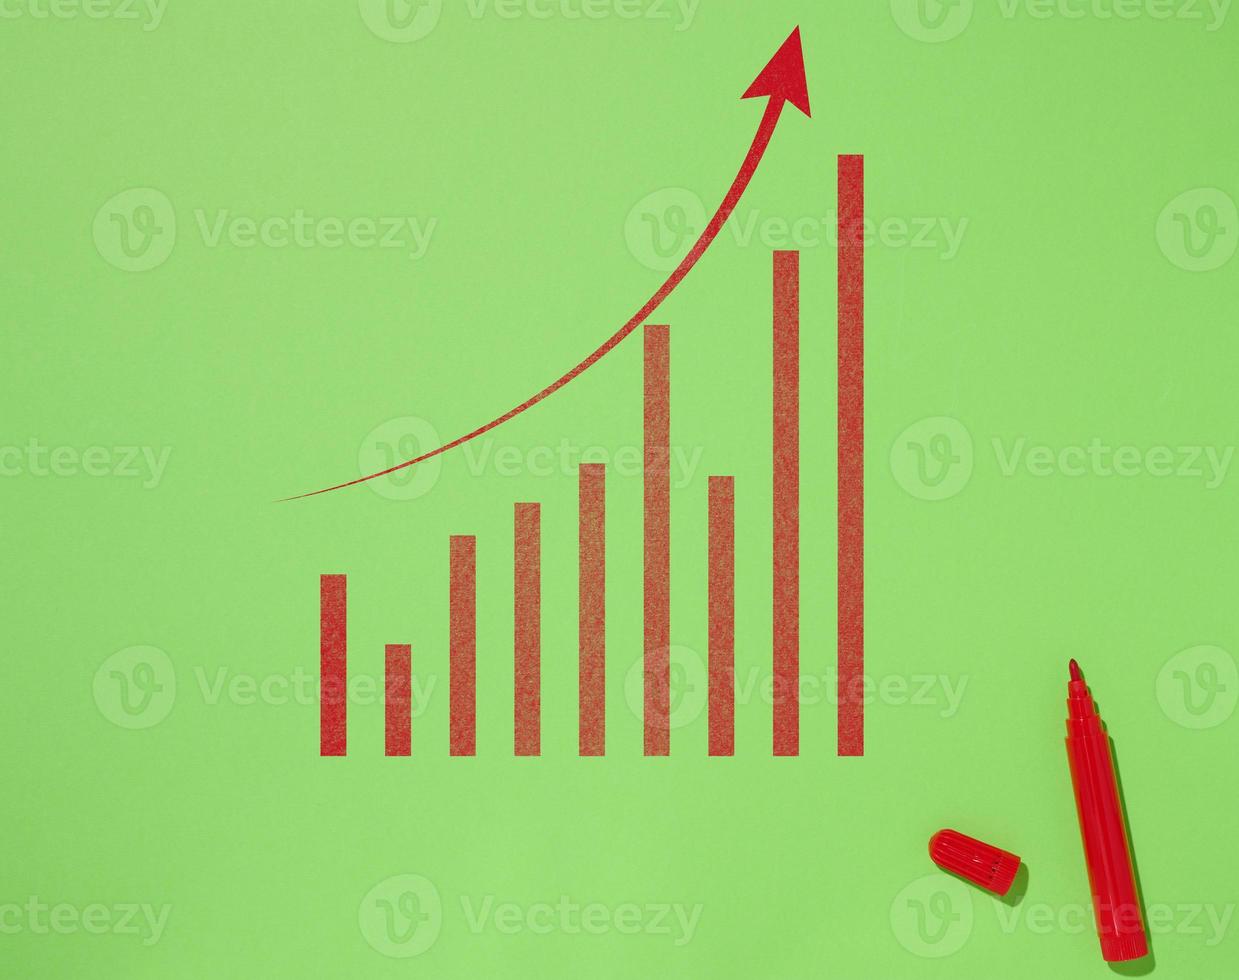 Drawn graph with a red marker on a green background, the concept of business income growth photo